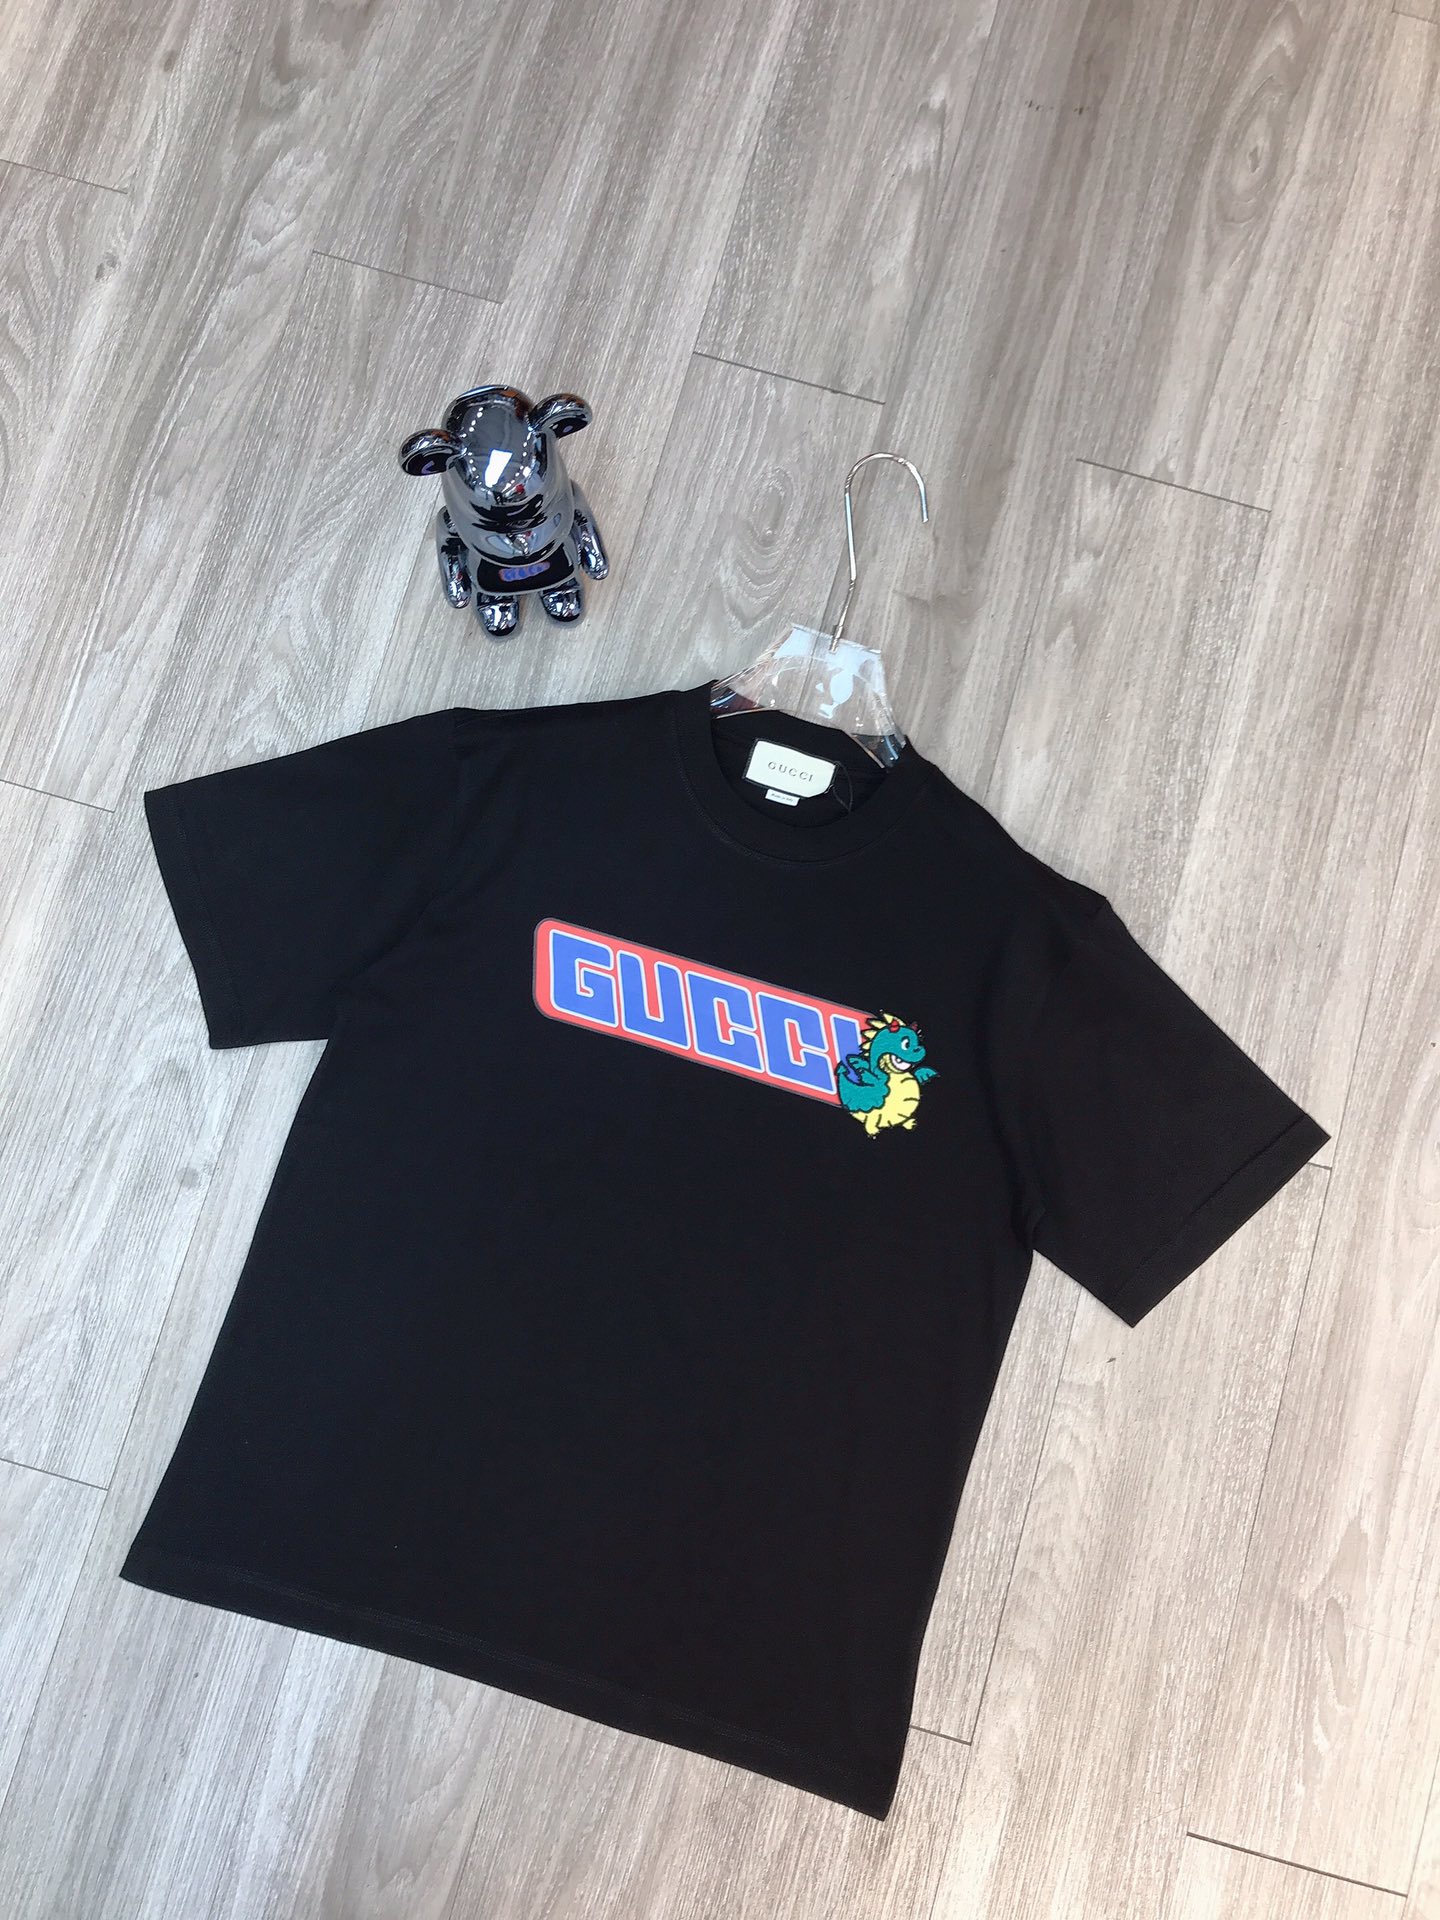 Gucci AAA Clothing T-Shirt Black White Men Cotton Spring/Summer Collection Fashion Short Sleeve